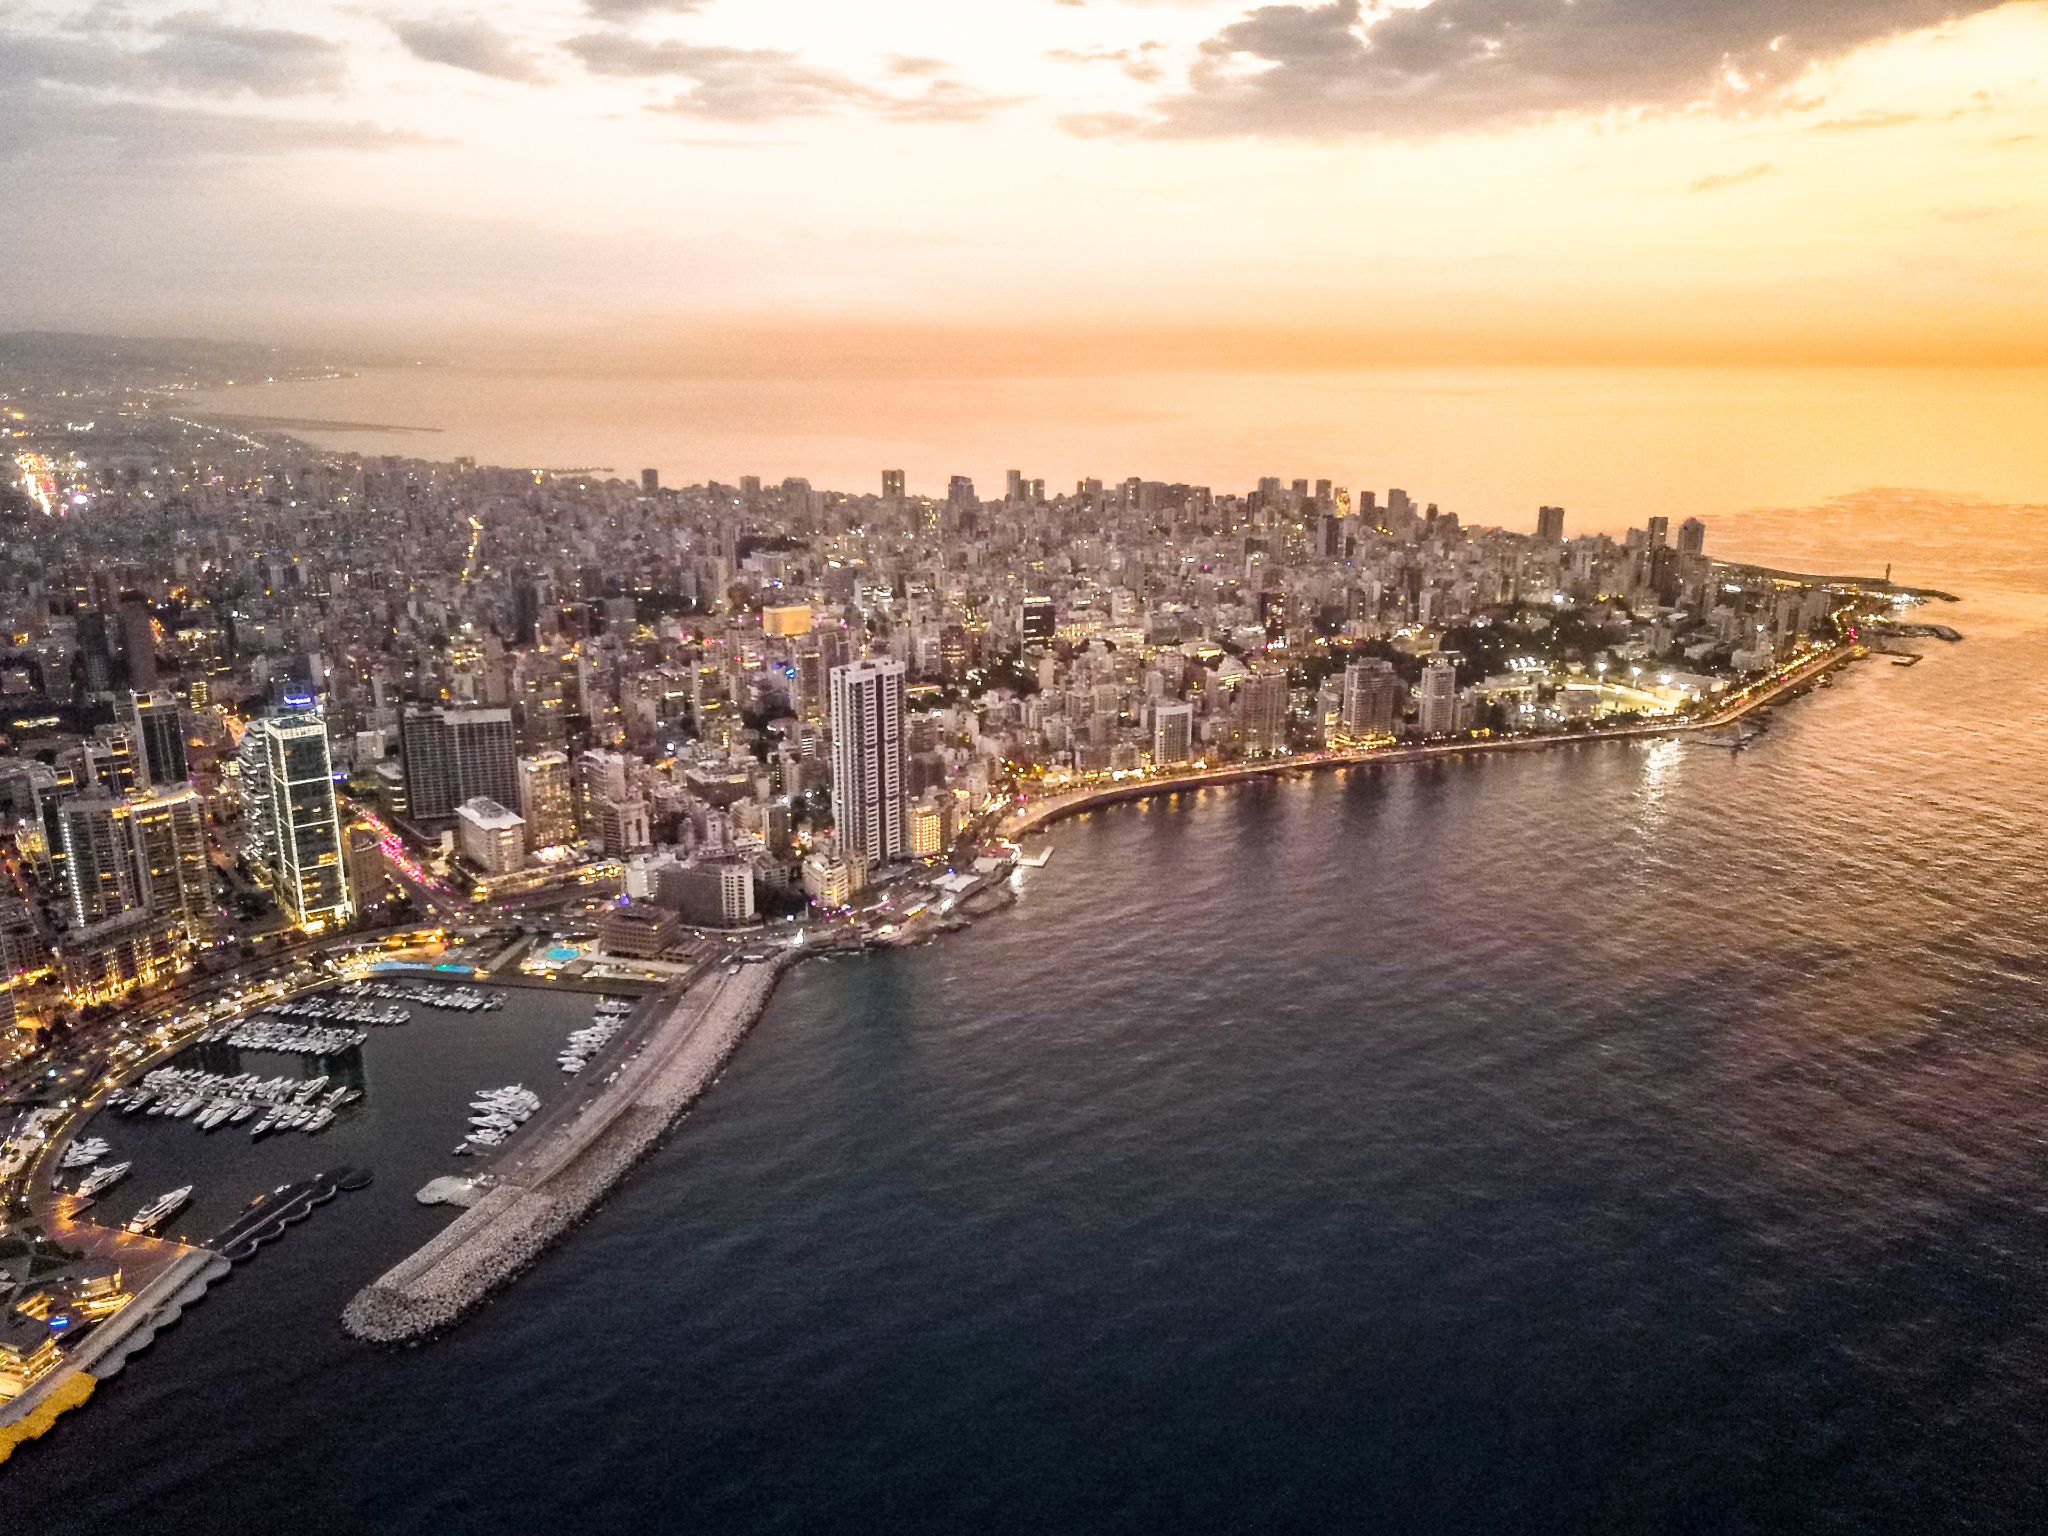 Beirut – and the rest of Lebanon – is suffering through a financial crisis